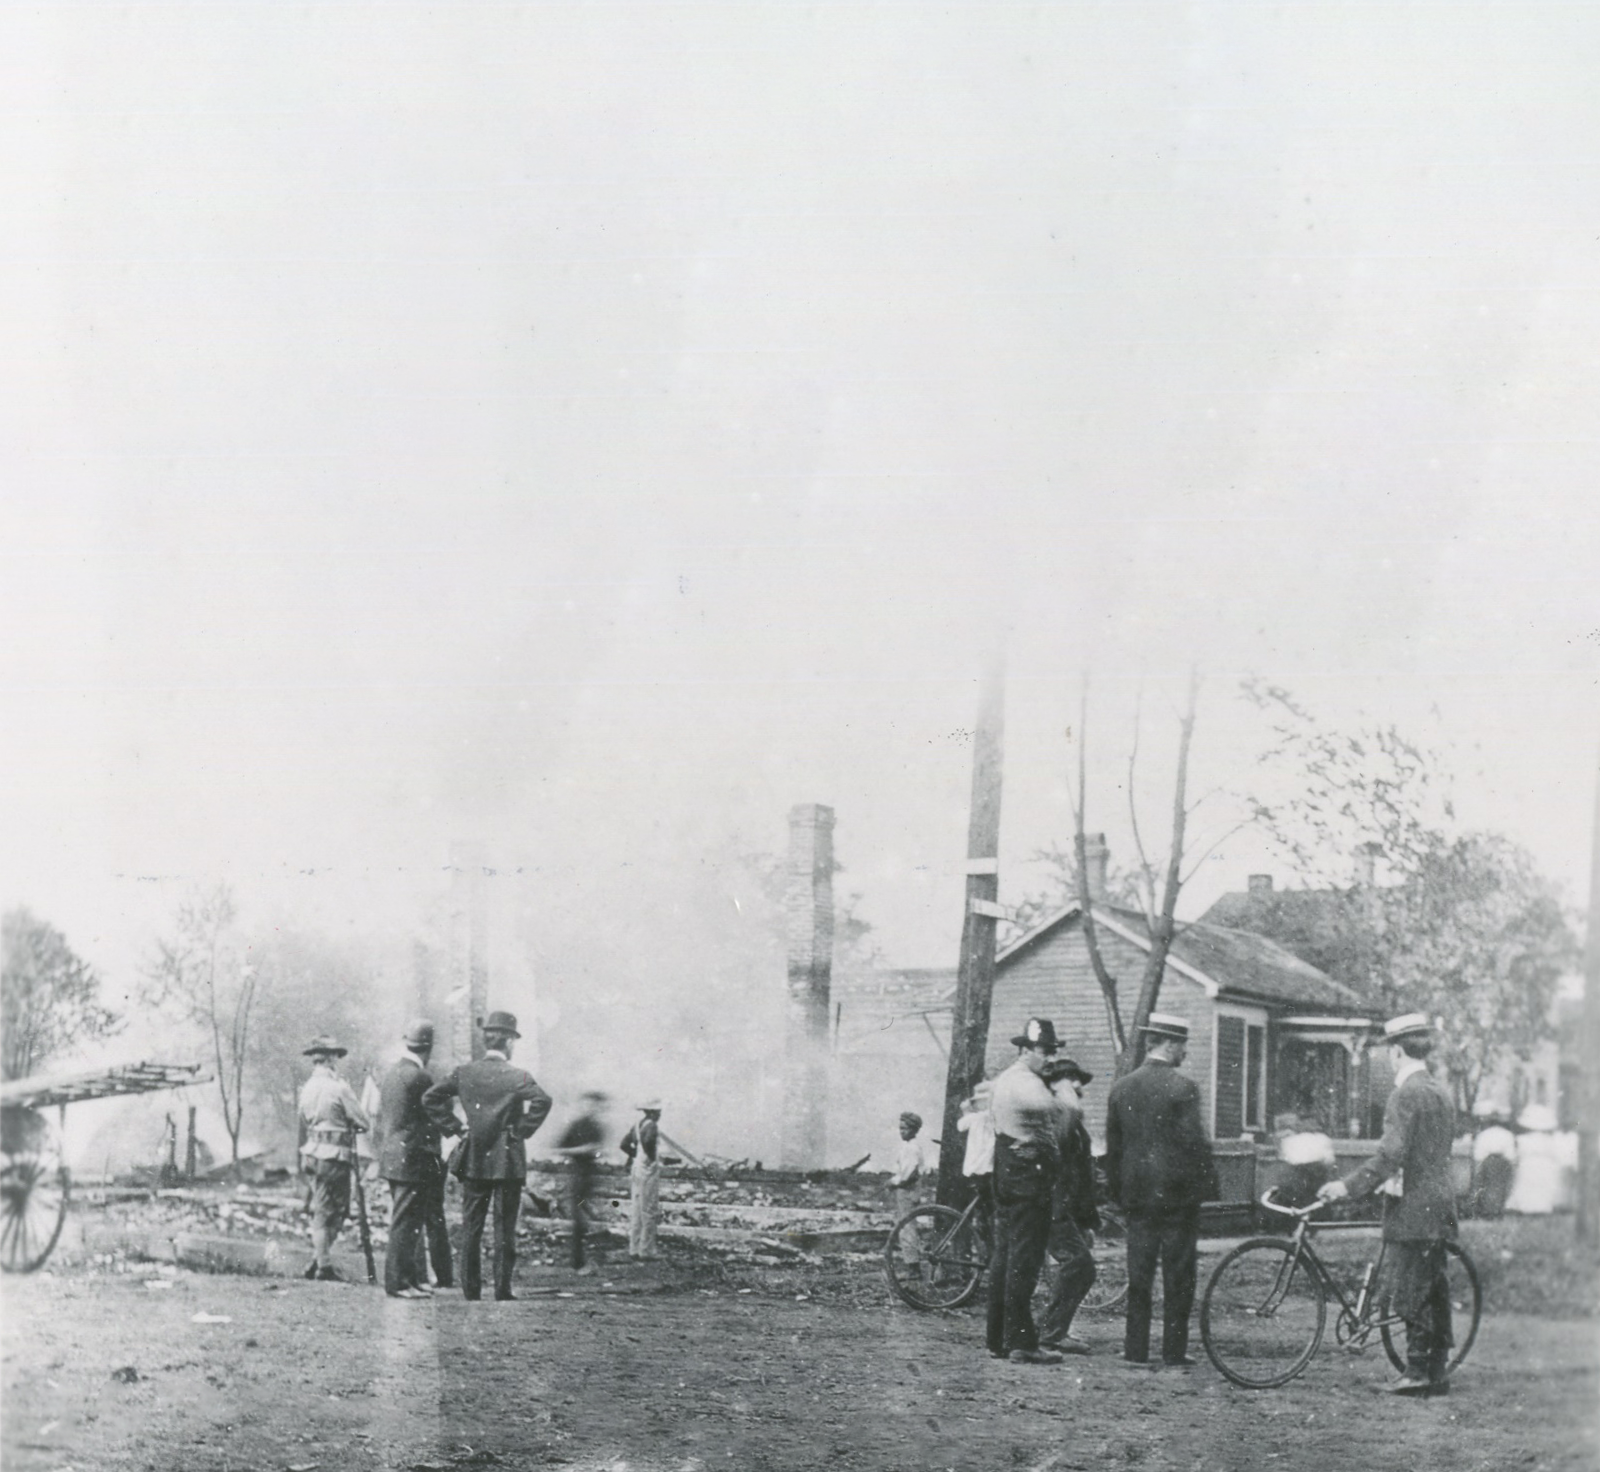 Facing away, men look at the remains of a burned building.